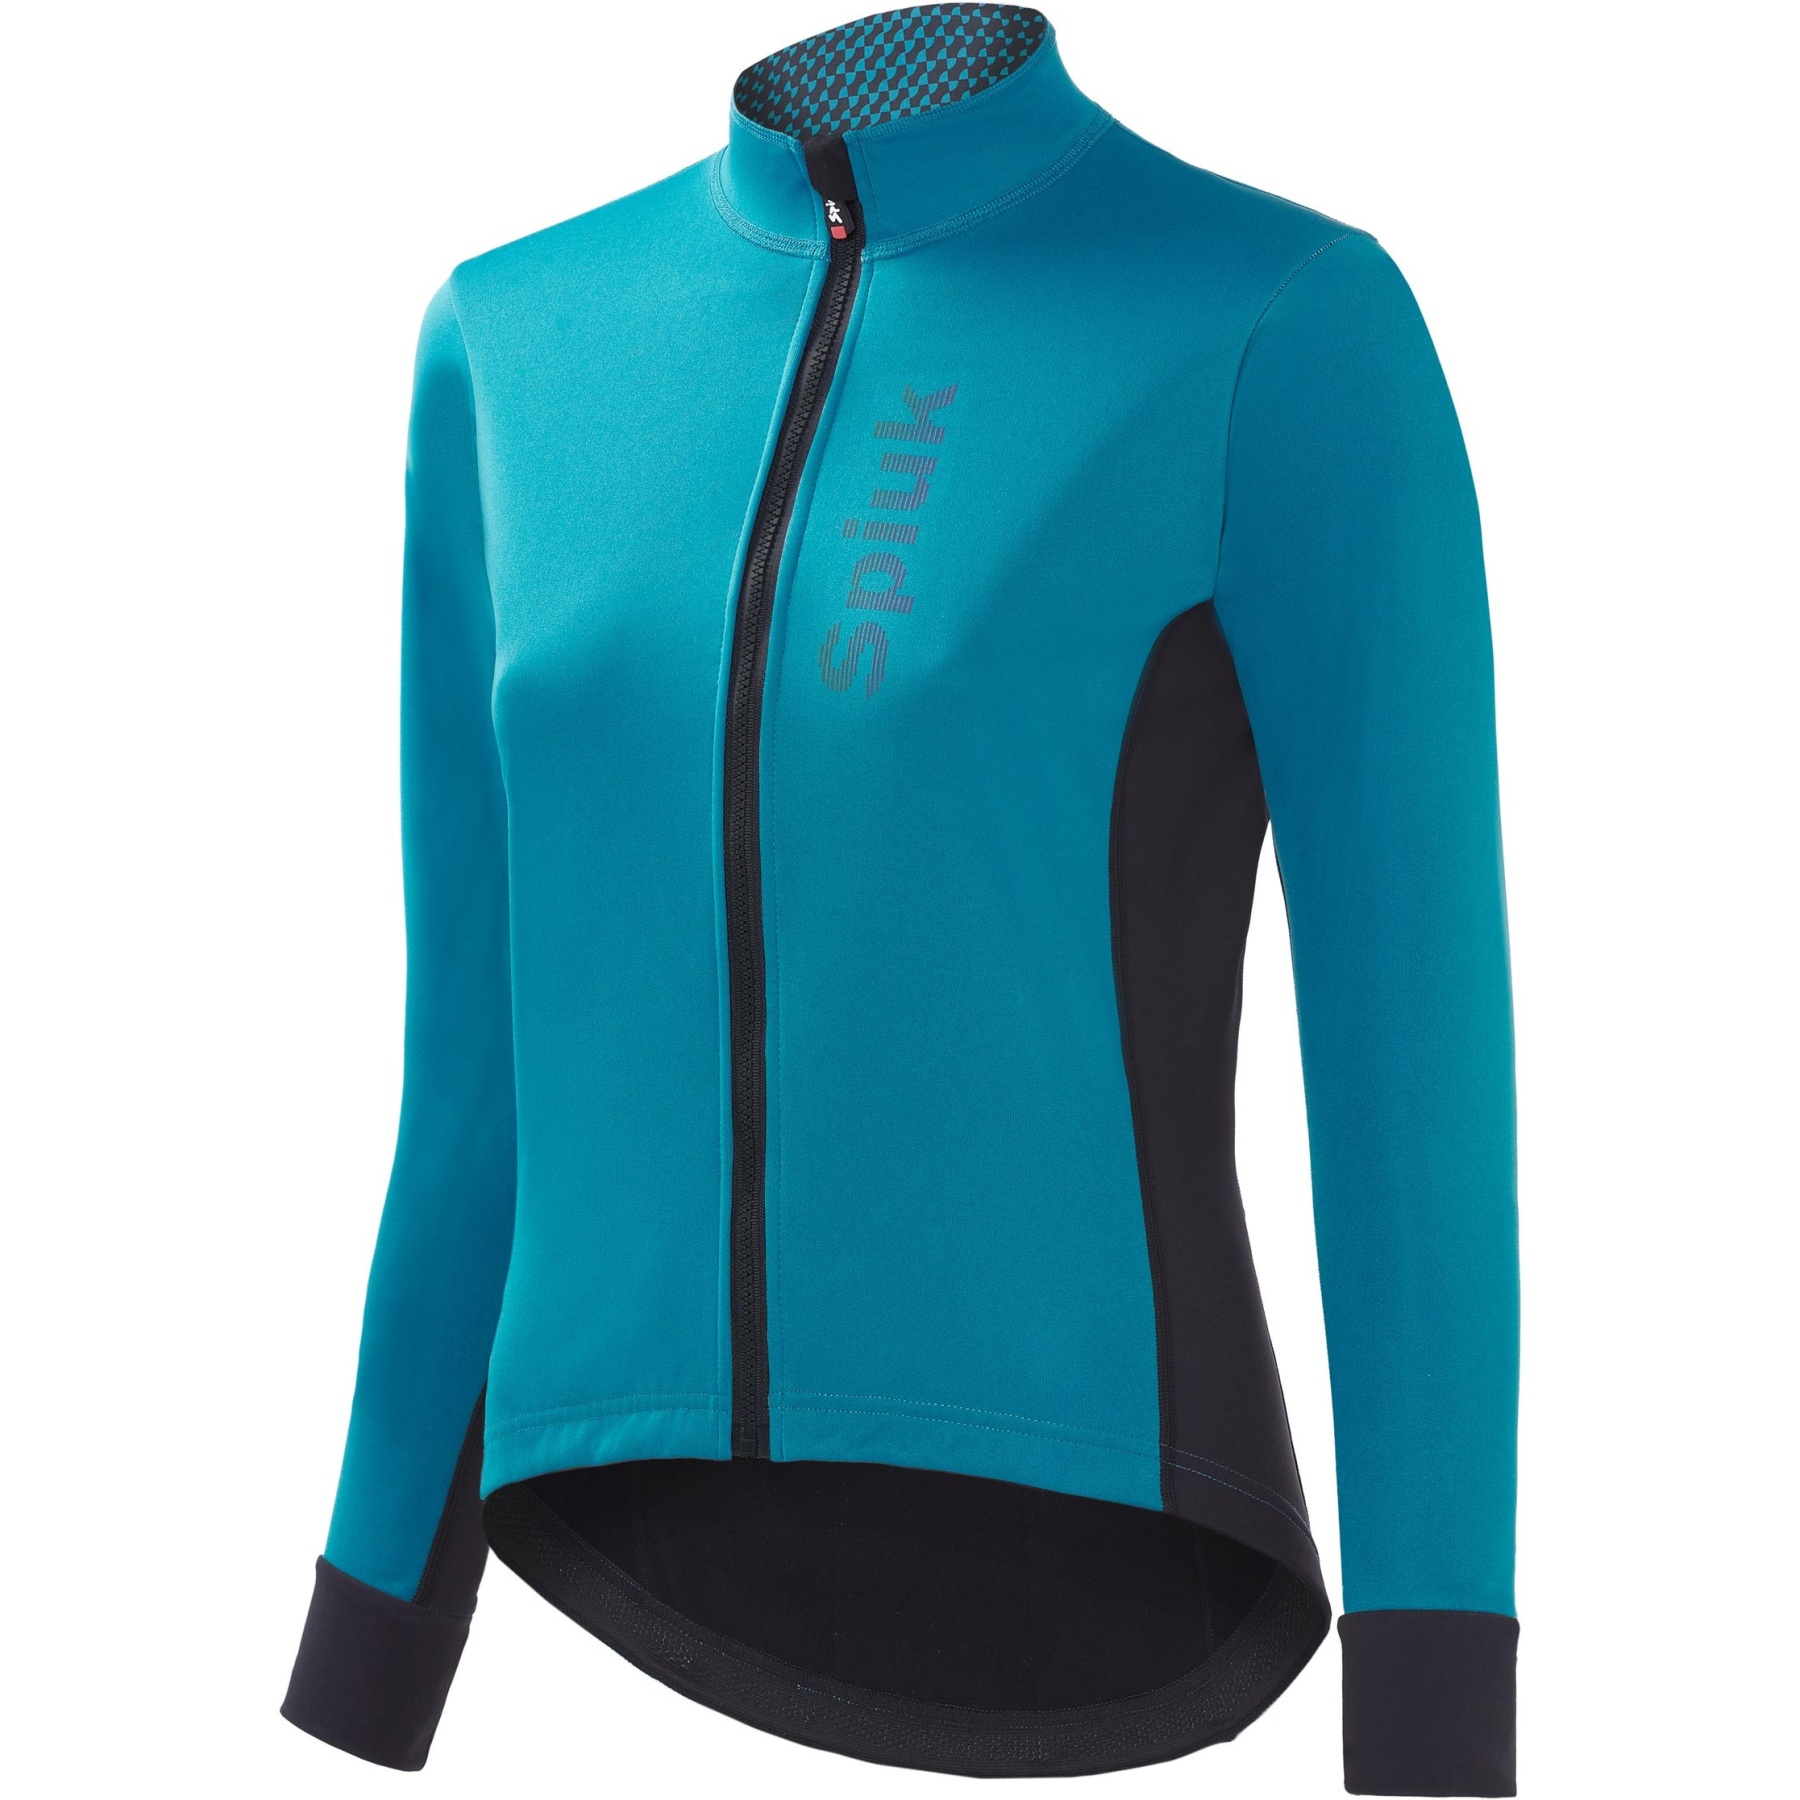 Picture of Spiuk ANATOMIC Membrane Jacket Women - blue turquoise